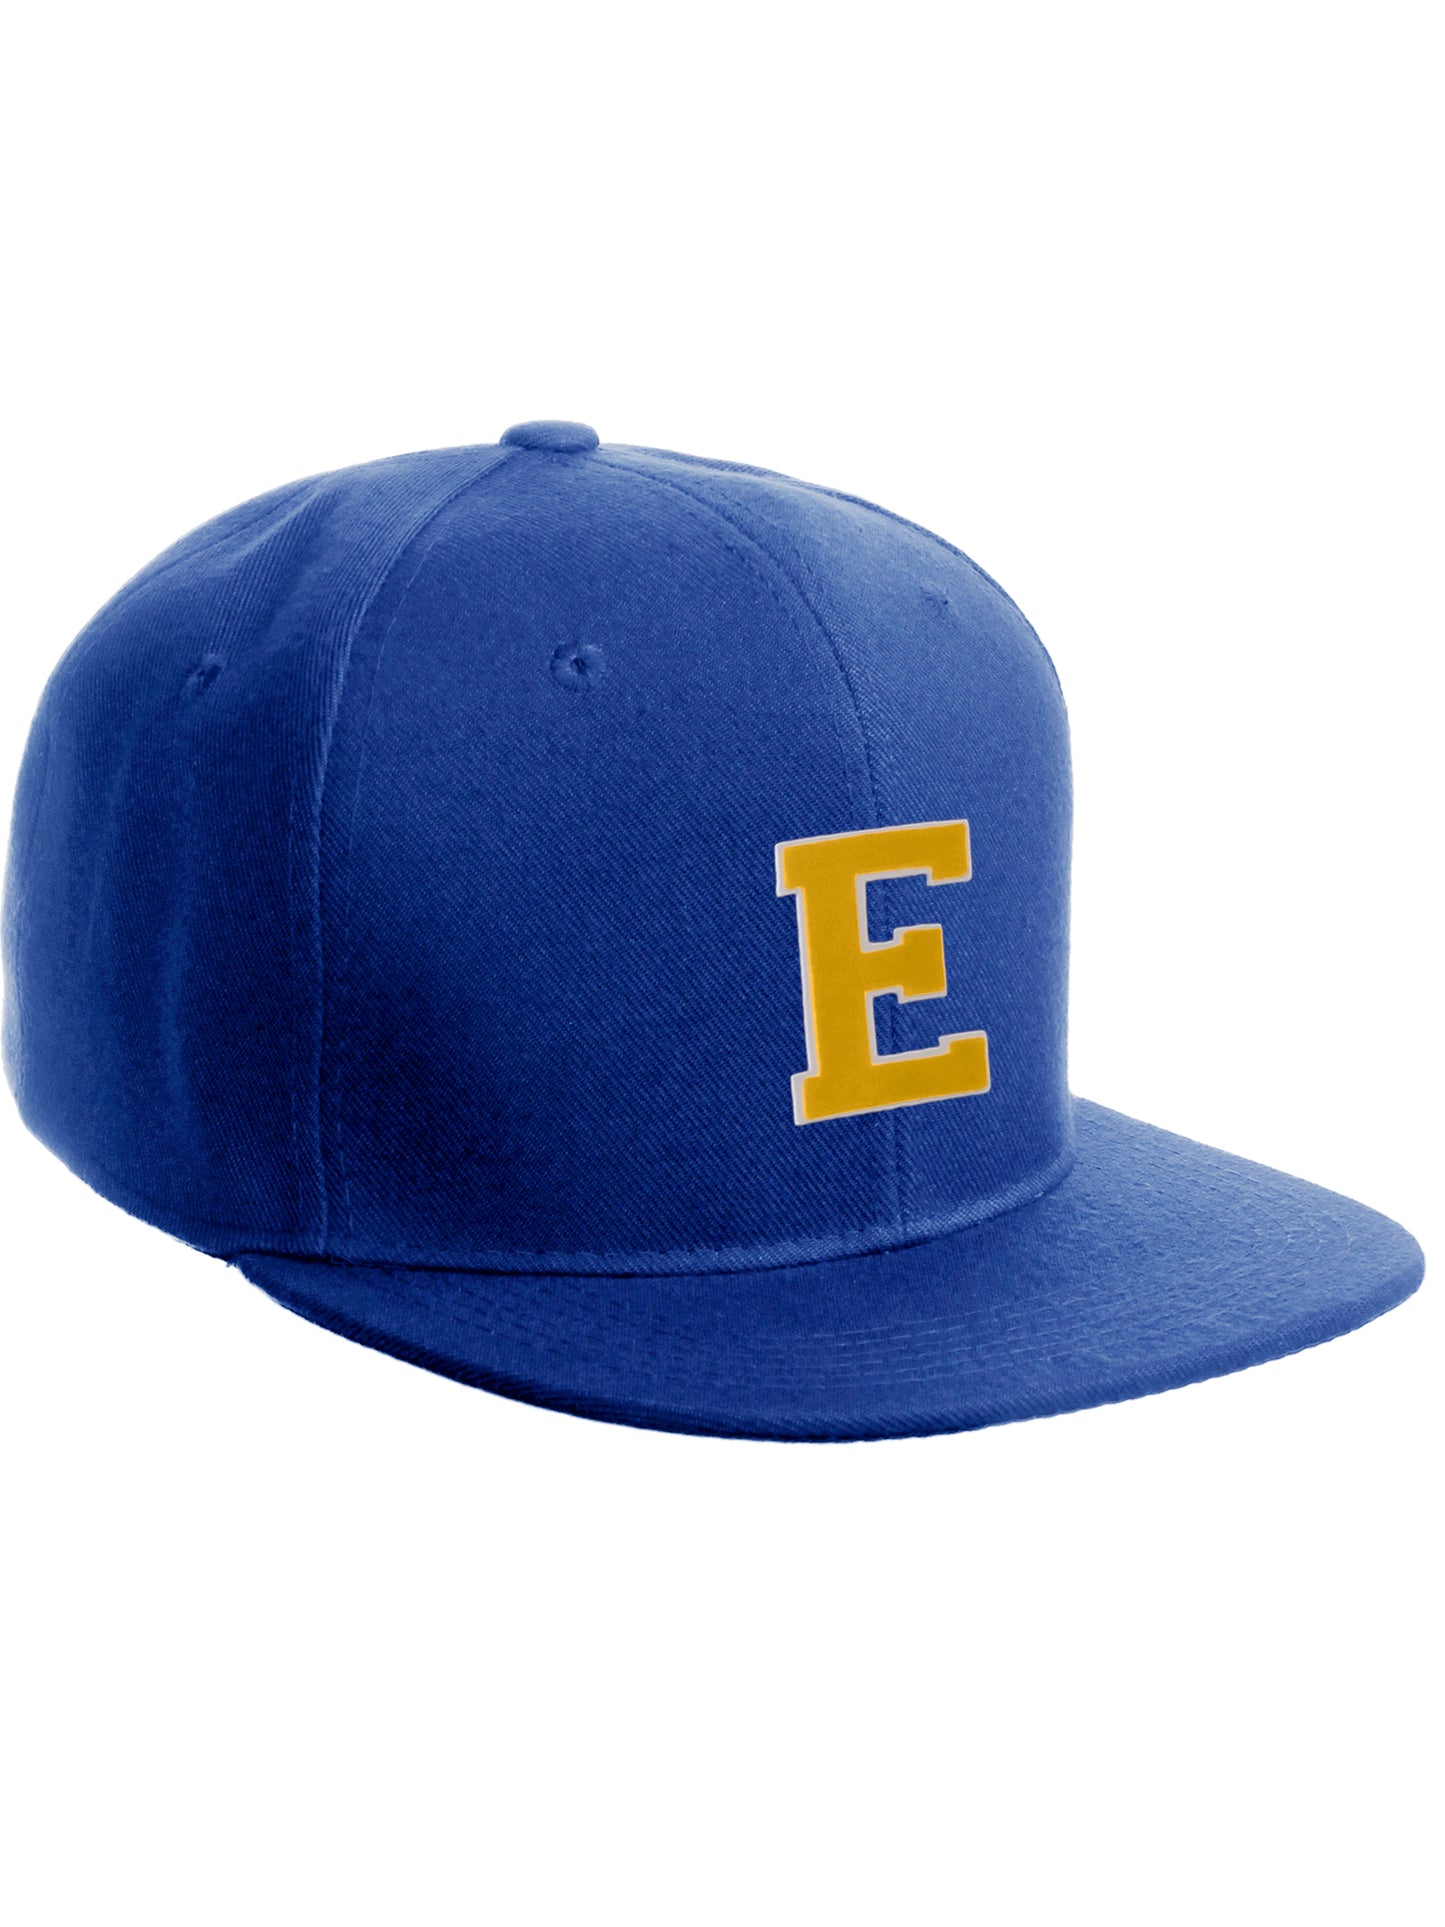 Classic Snapback Hat Custom A to Z Initial Raised Letter, Royal Cap White Gold